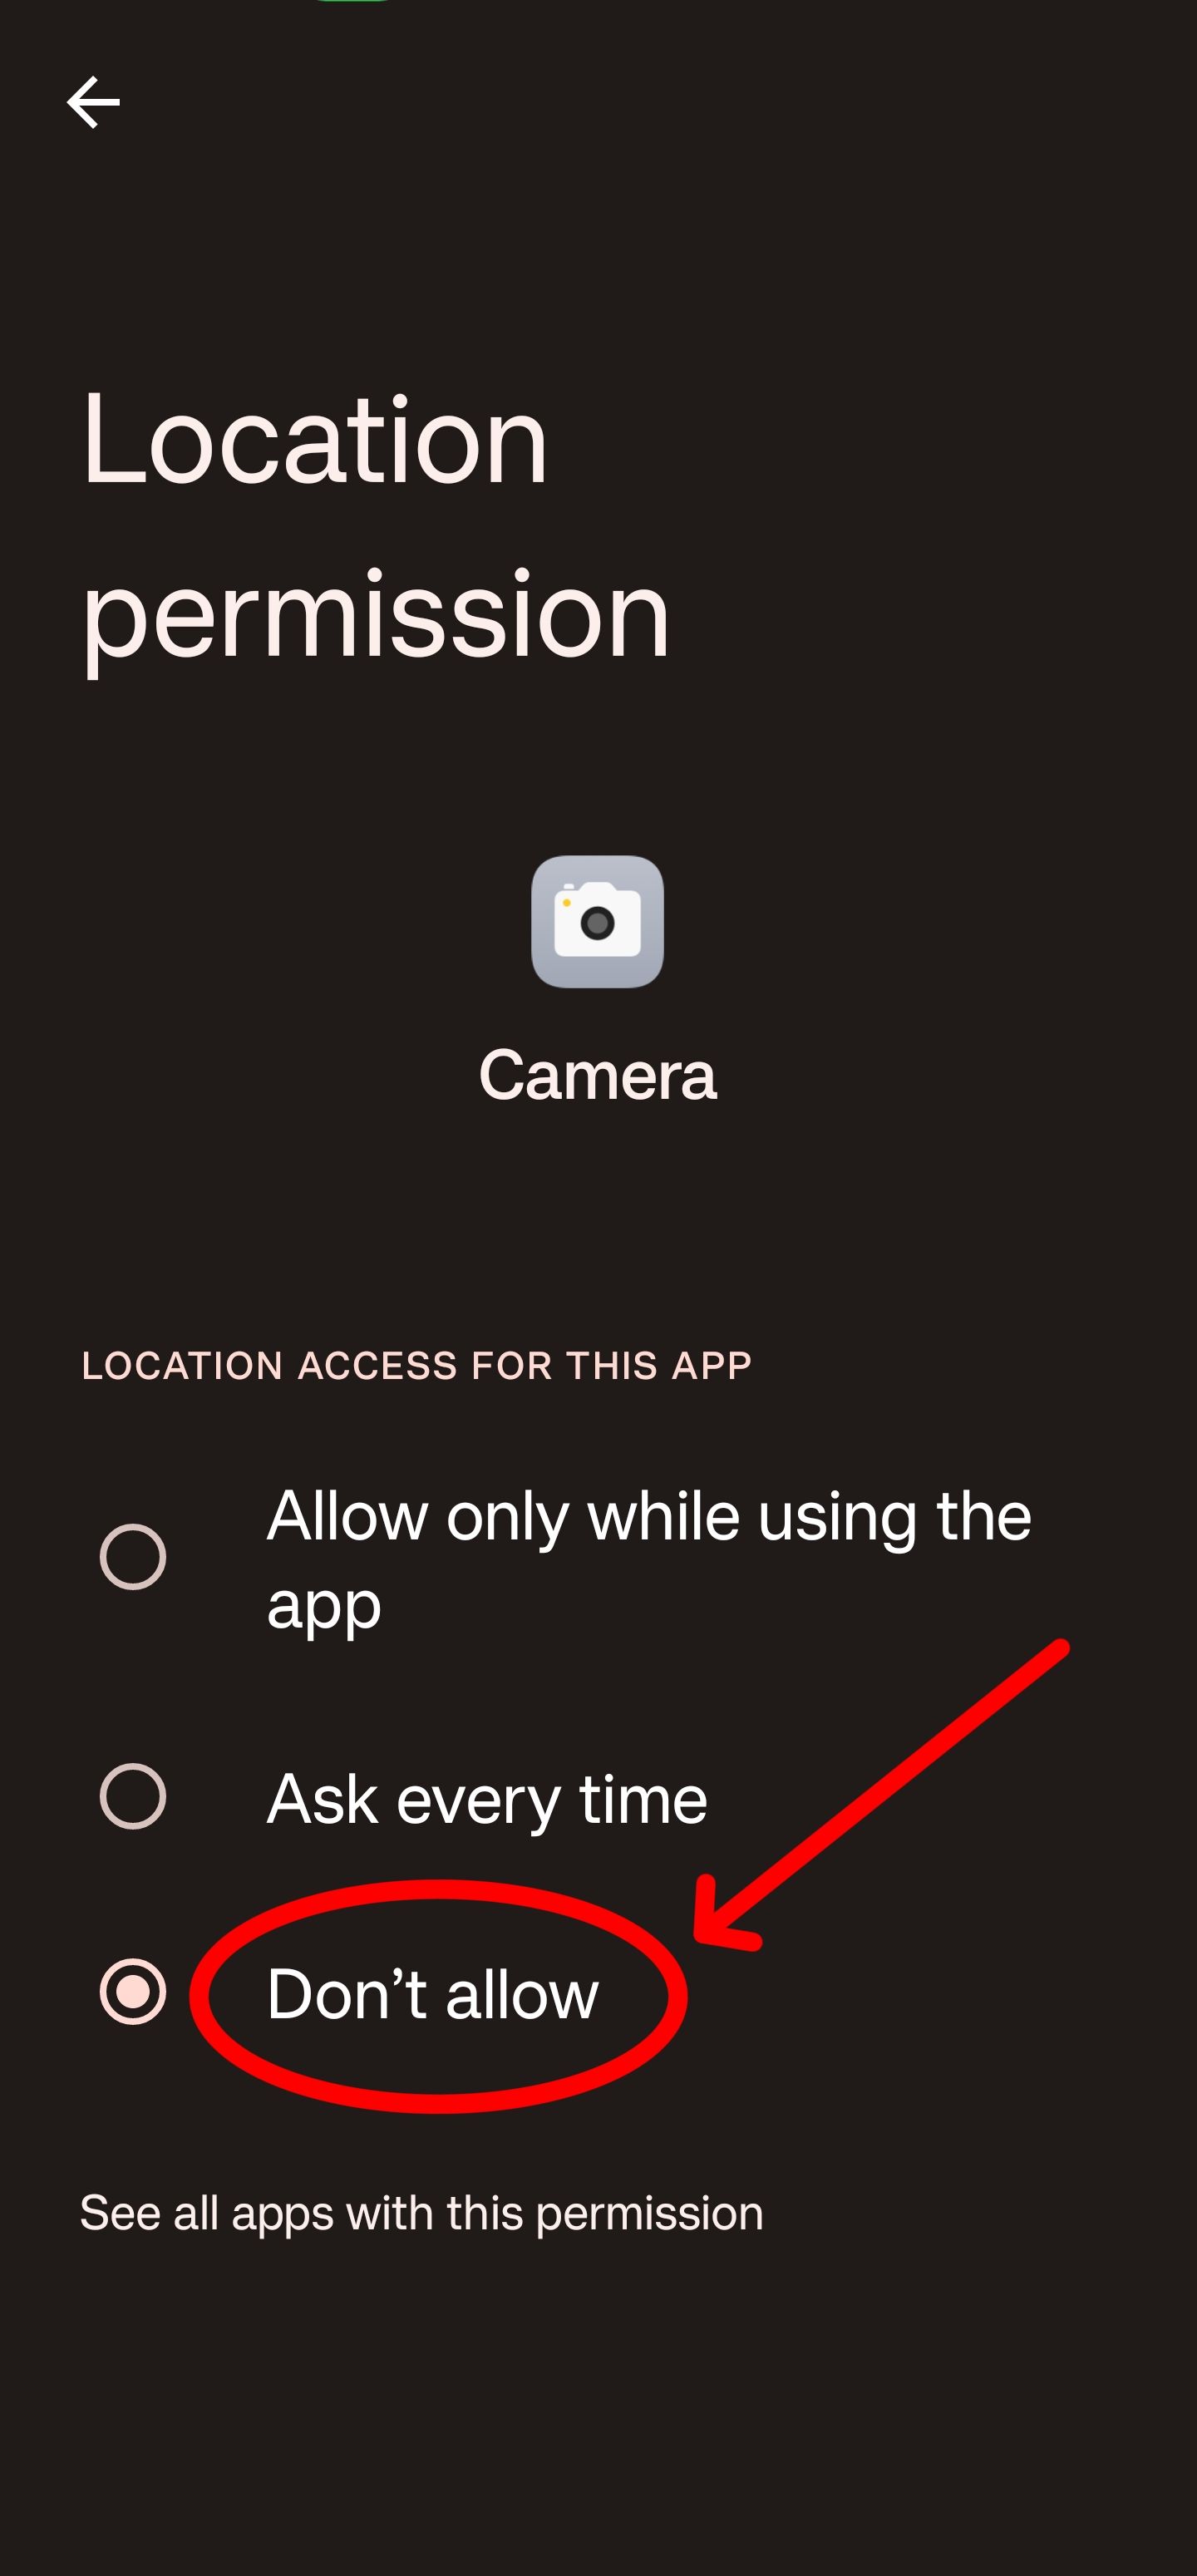 Select don't allow to stop your app from accessing your location.